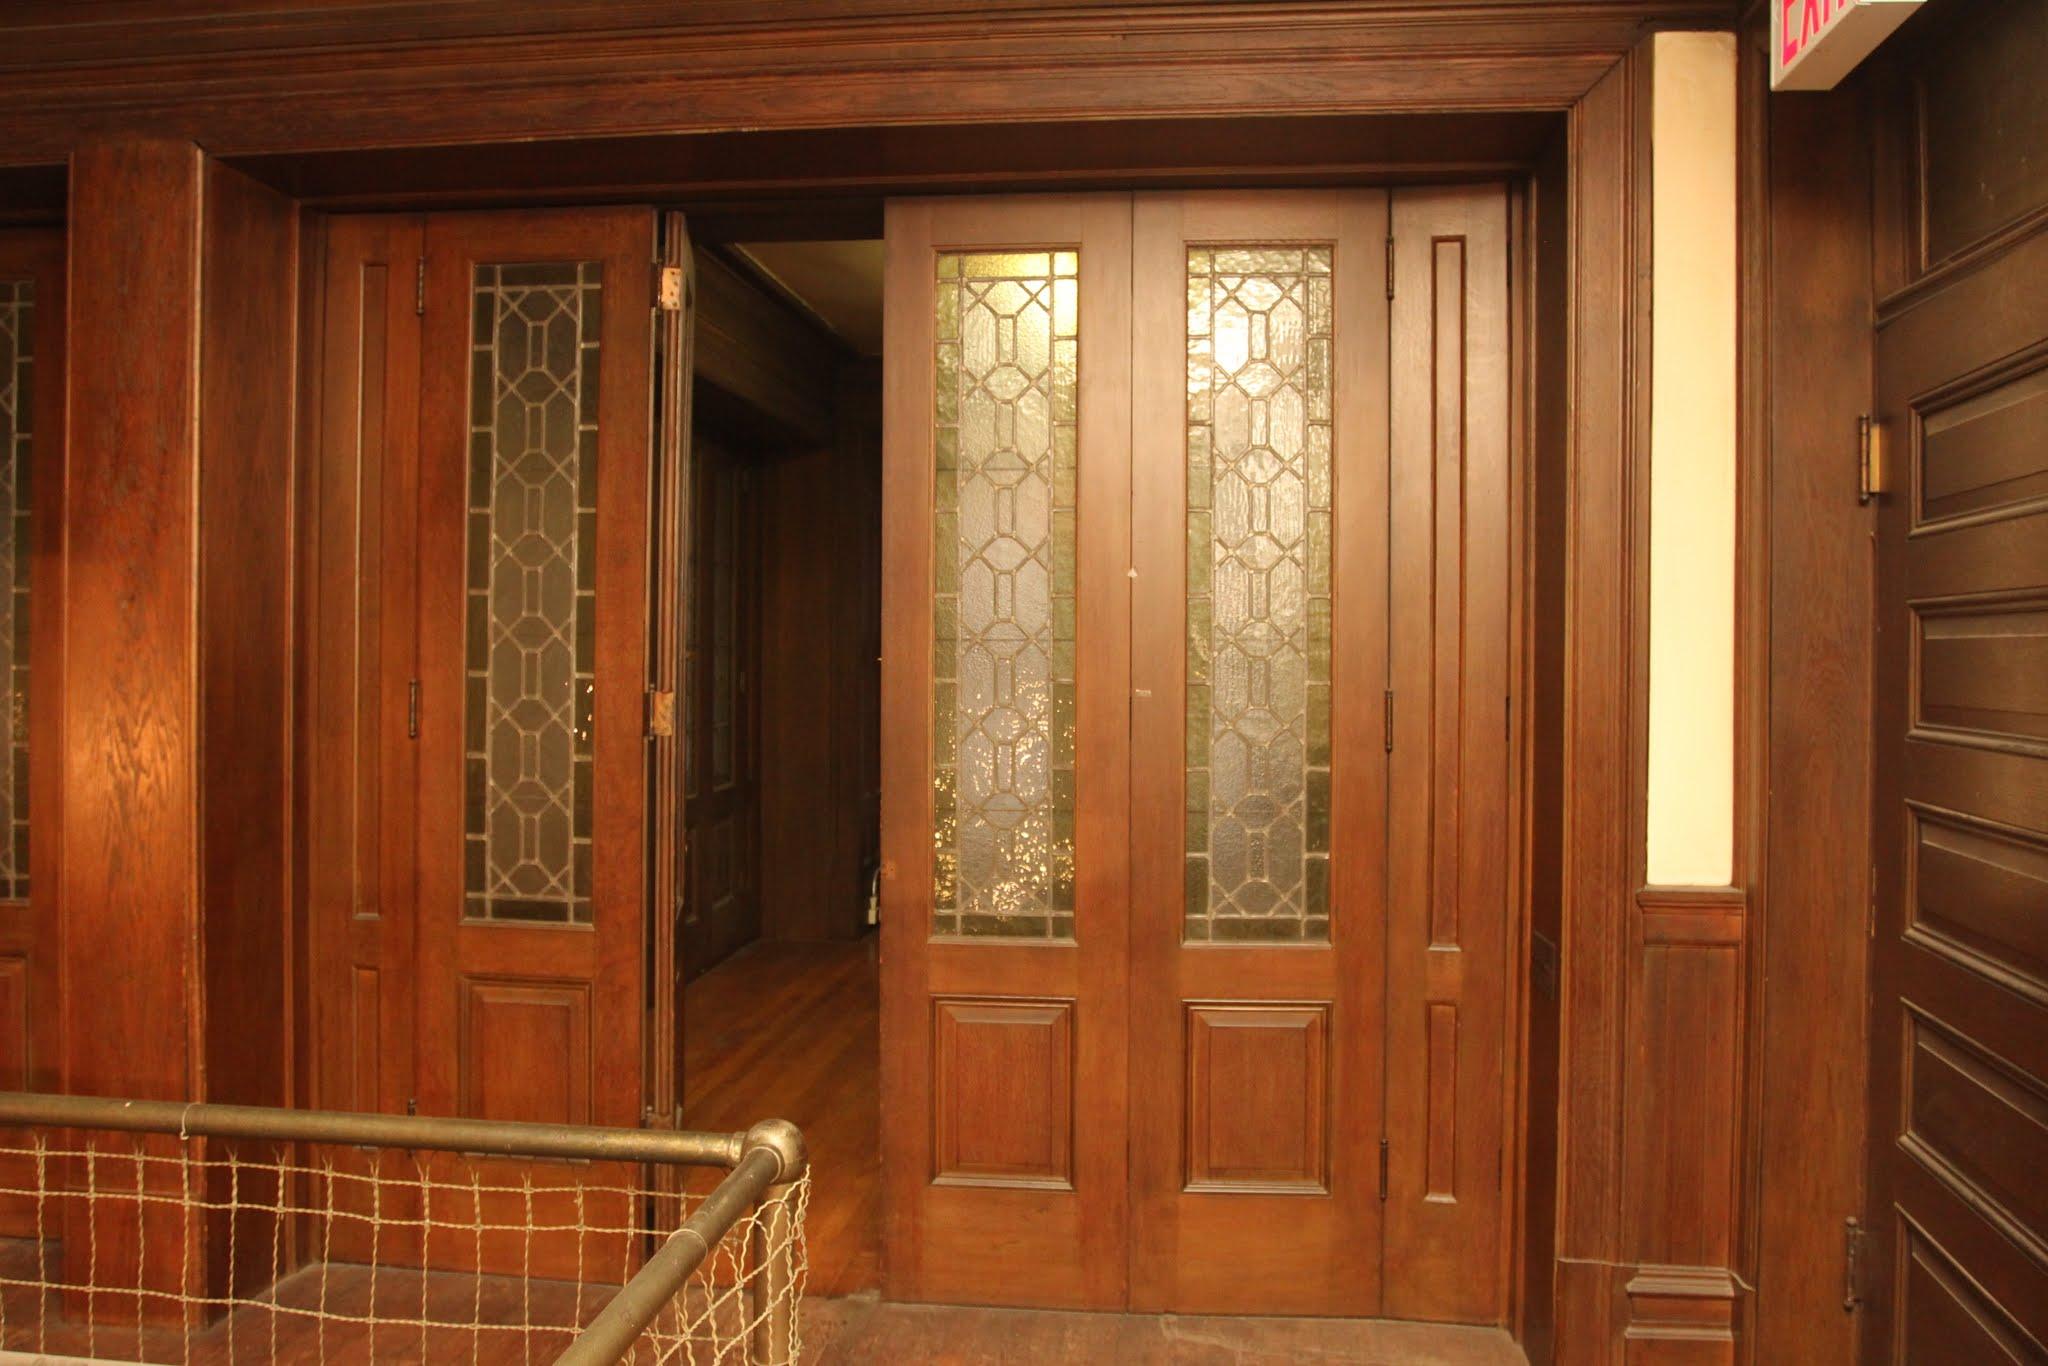 1907 Bifold Stained Glass Doors from Madison Avenue Baptist Church Parish House 2